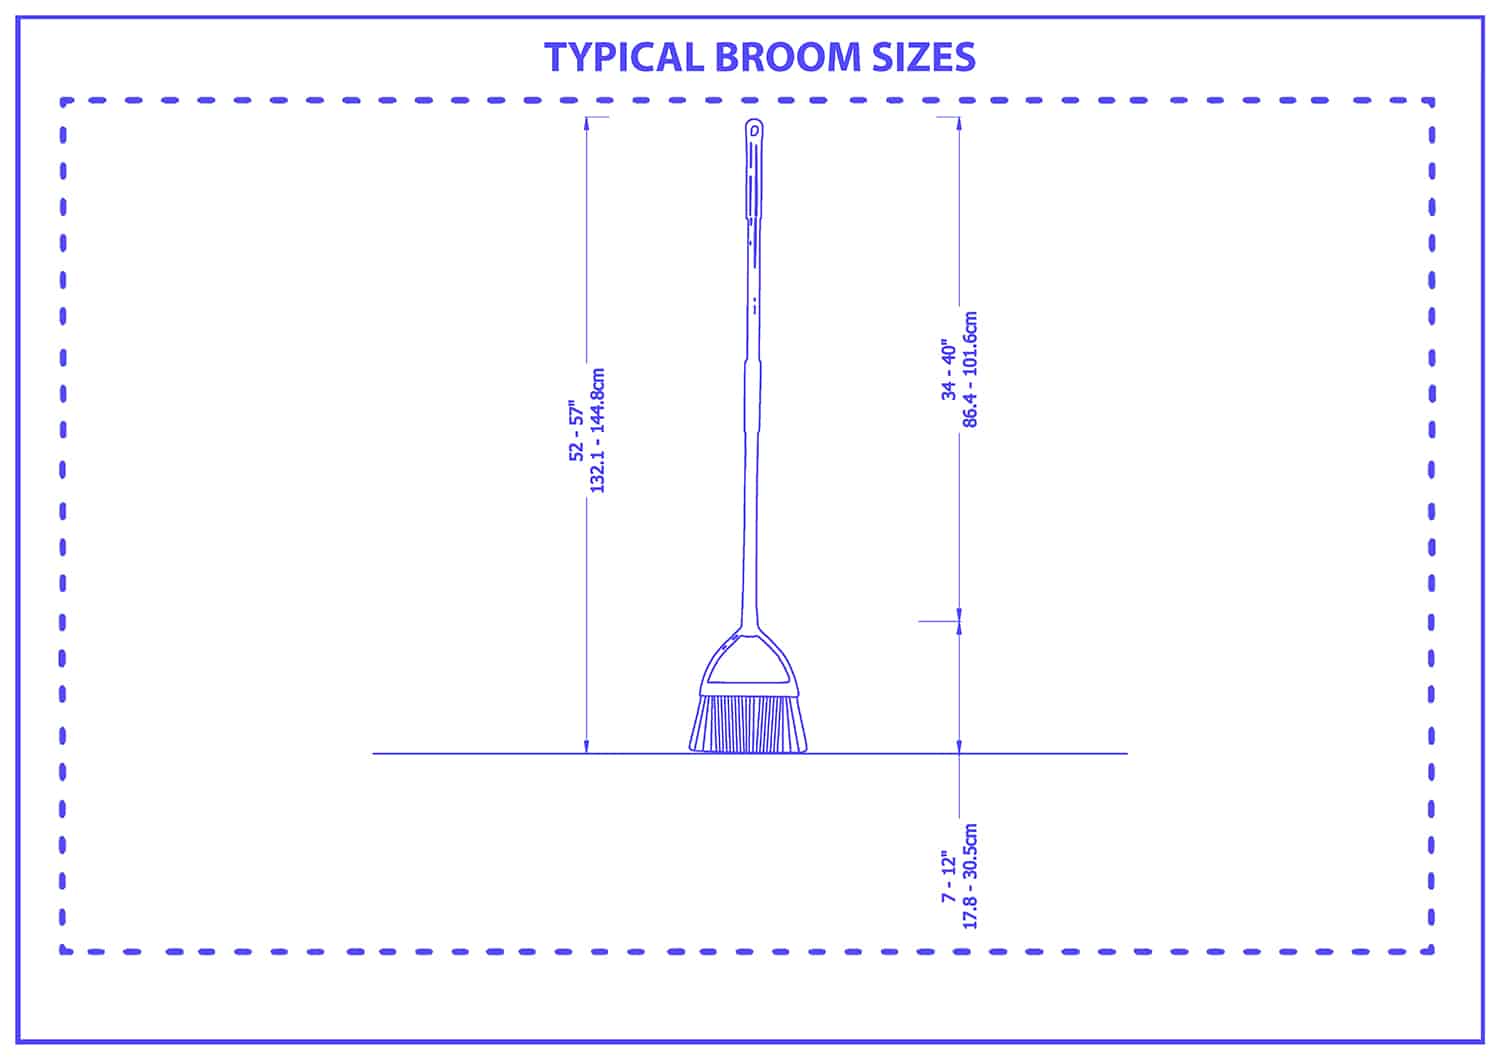 Typical broom sizes